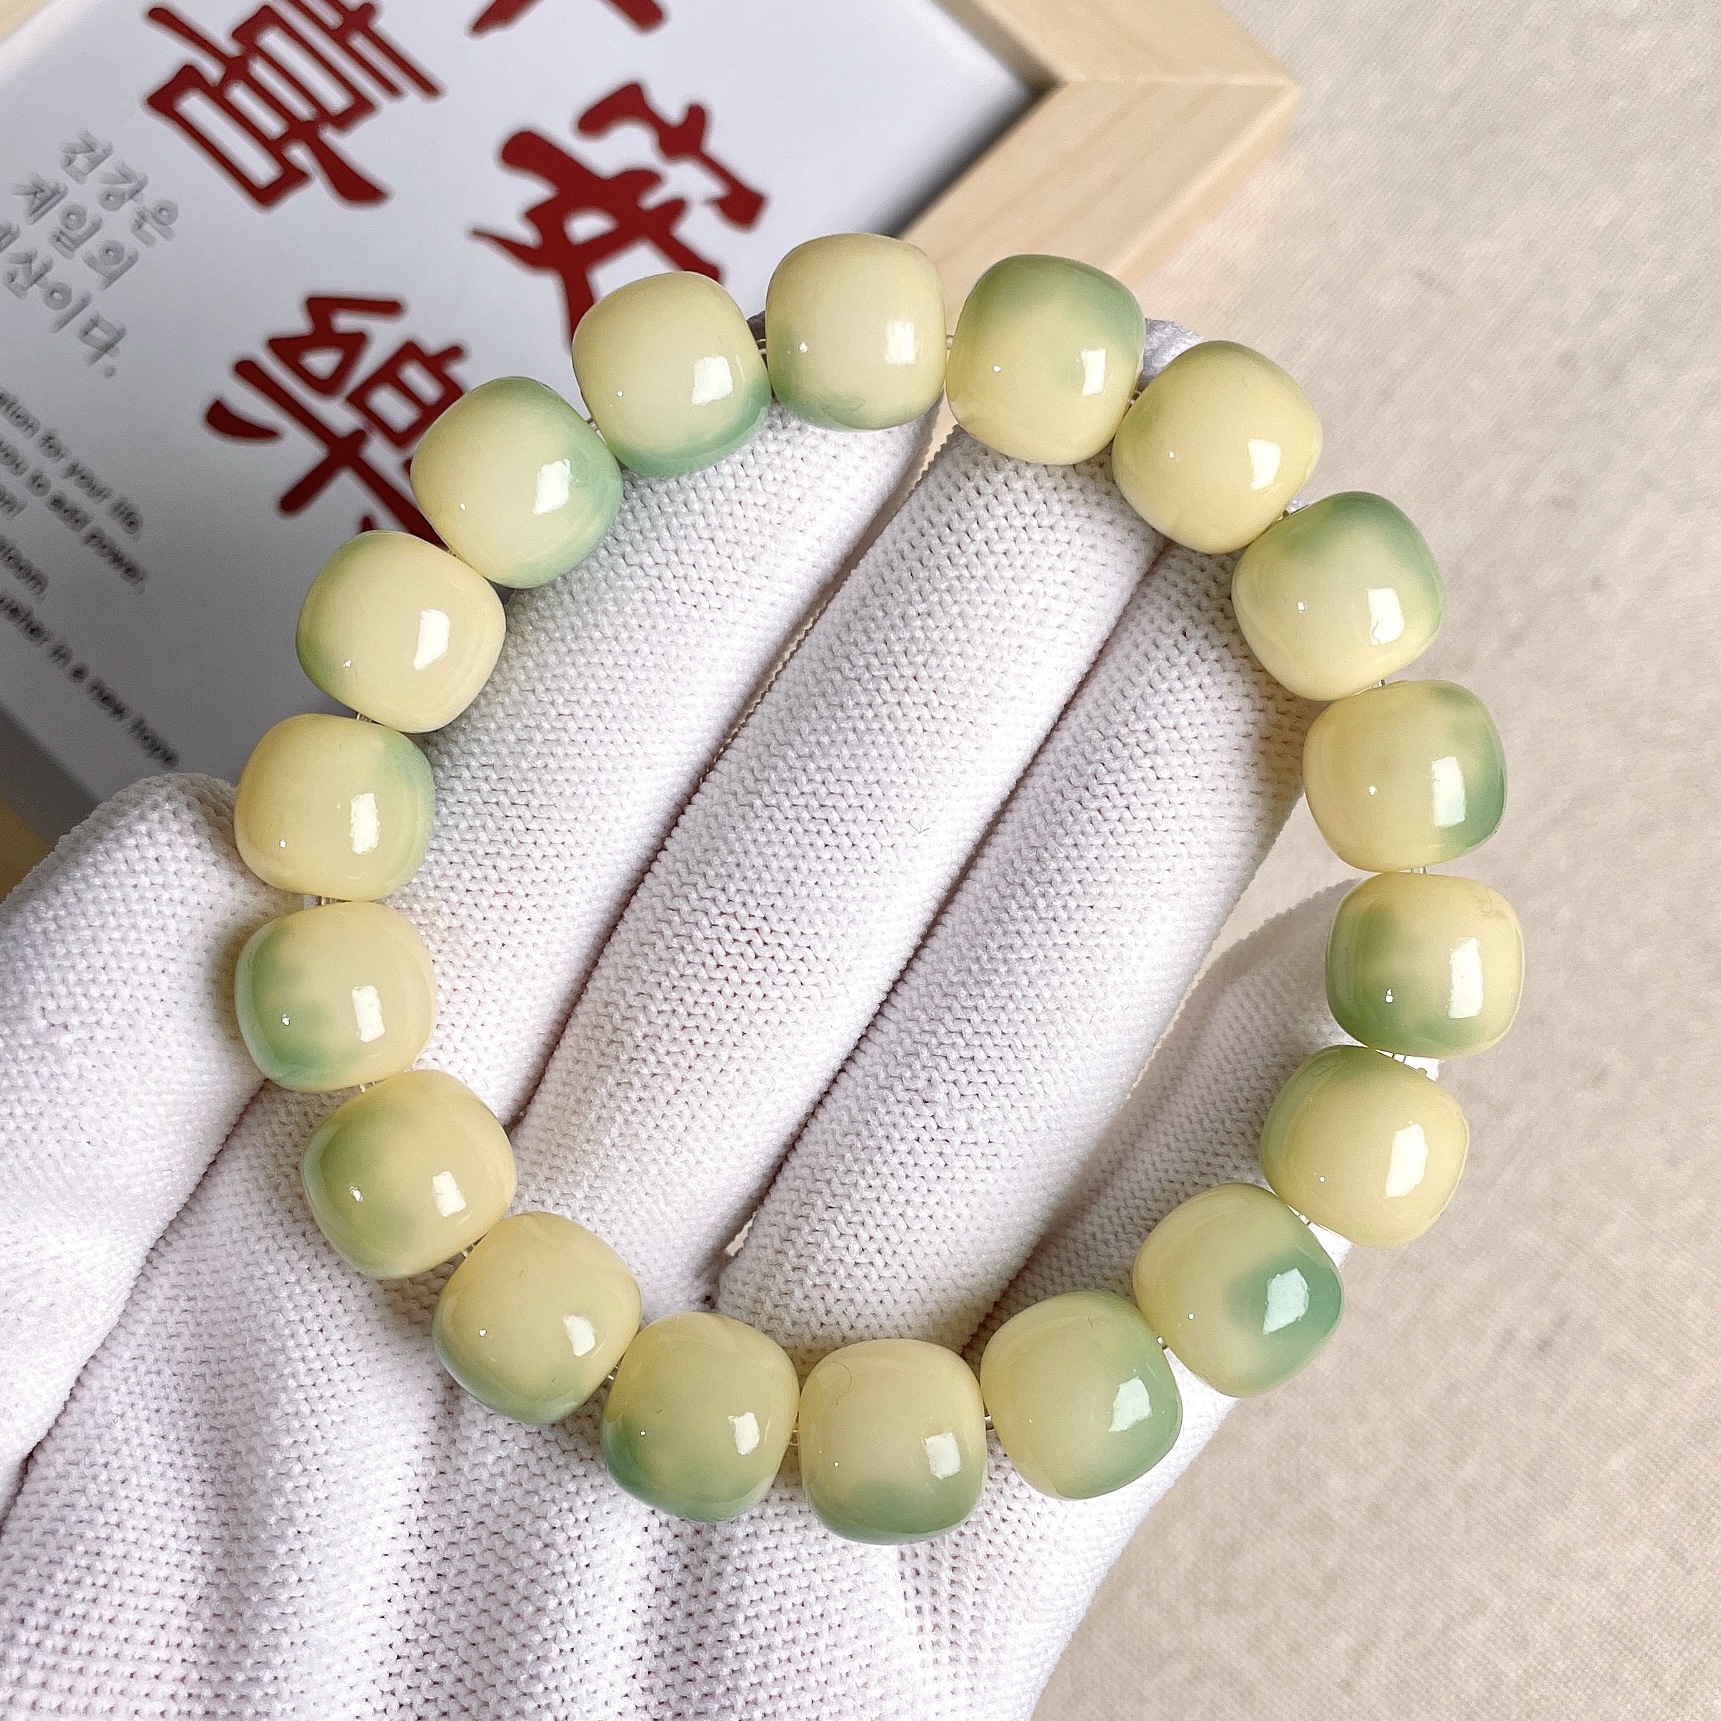 Natural Bodhi Bead Bracelet Smoky Gray Floating Flowers Bodhi Bracelet Crafts Buddha Beads Rosary High Throw Seiko Factory Direct Sales